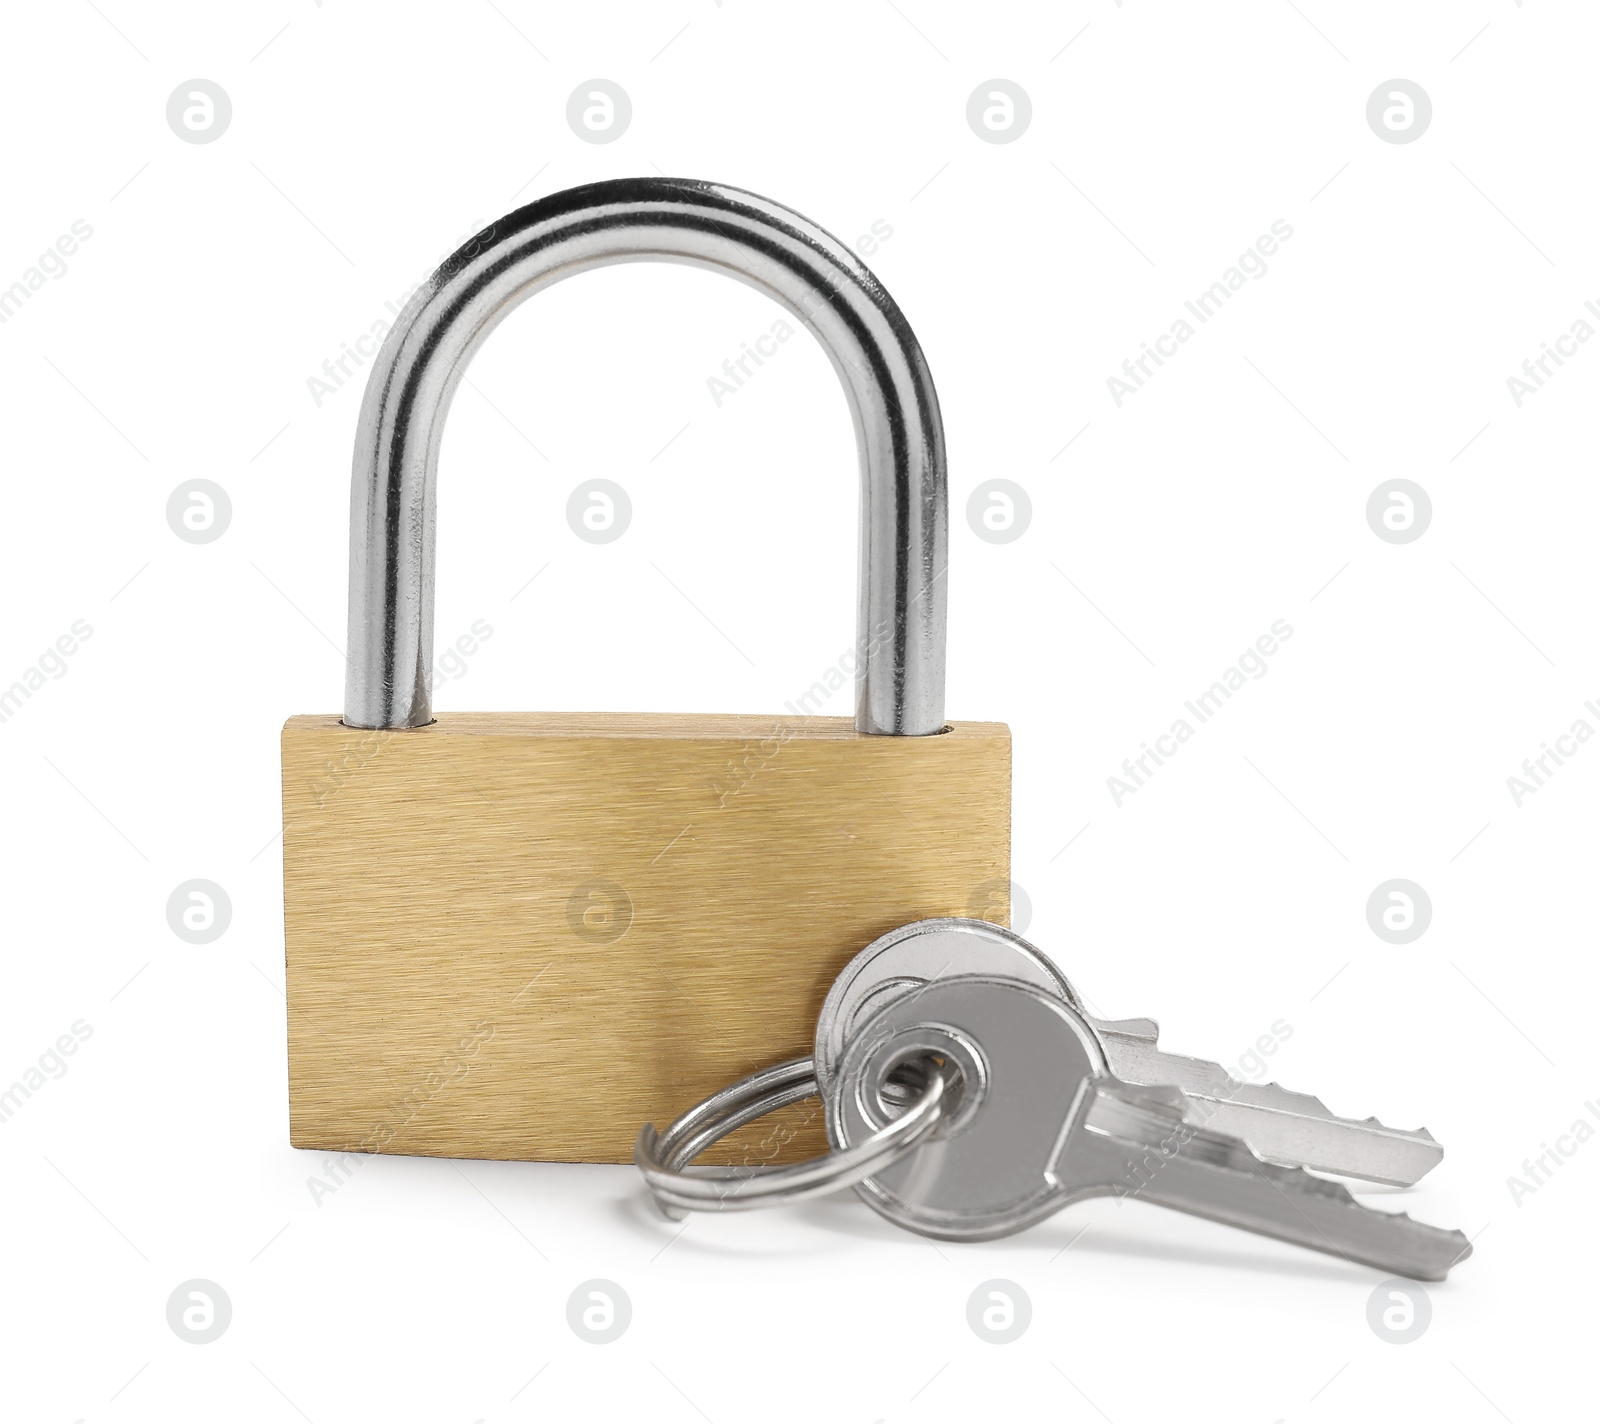 Photo of Steel padlock and keys isolated on white